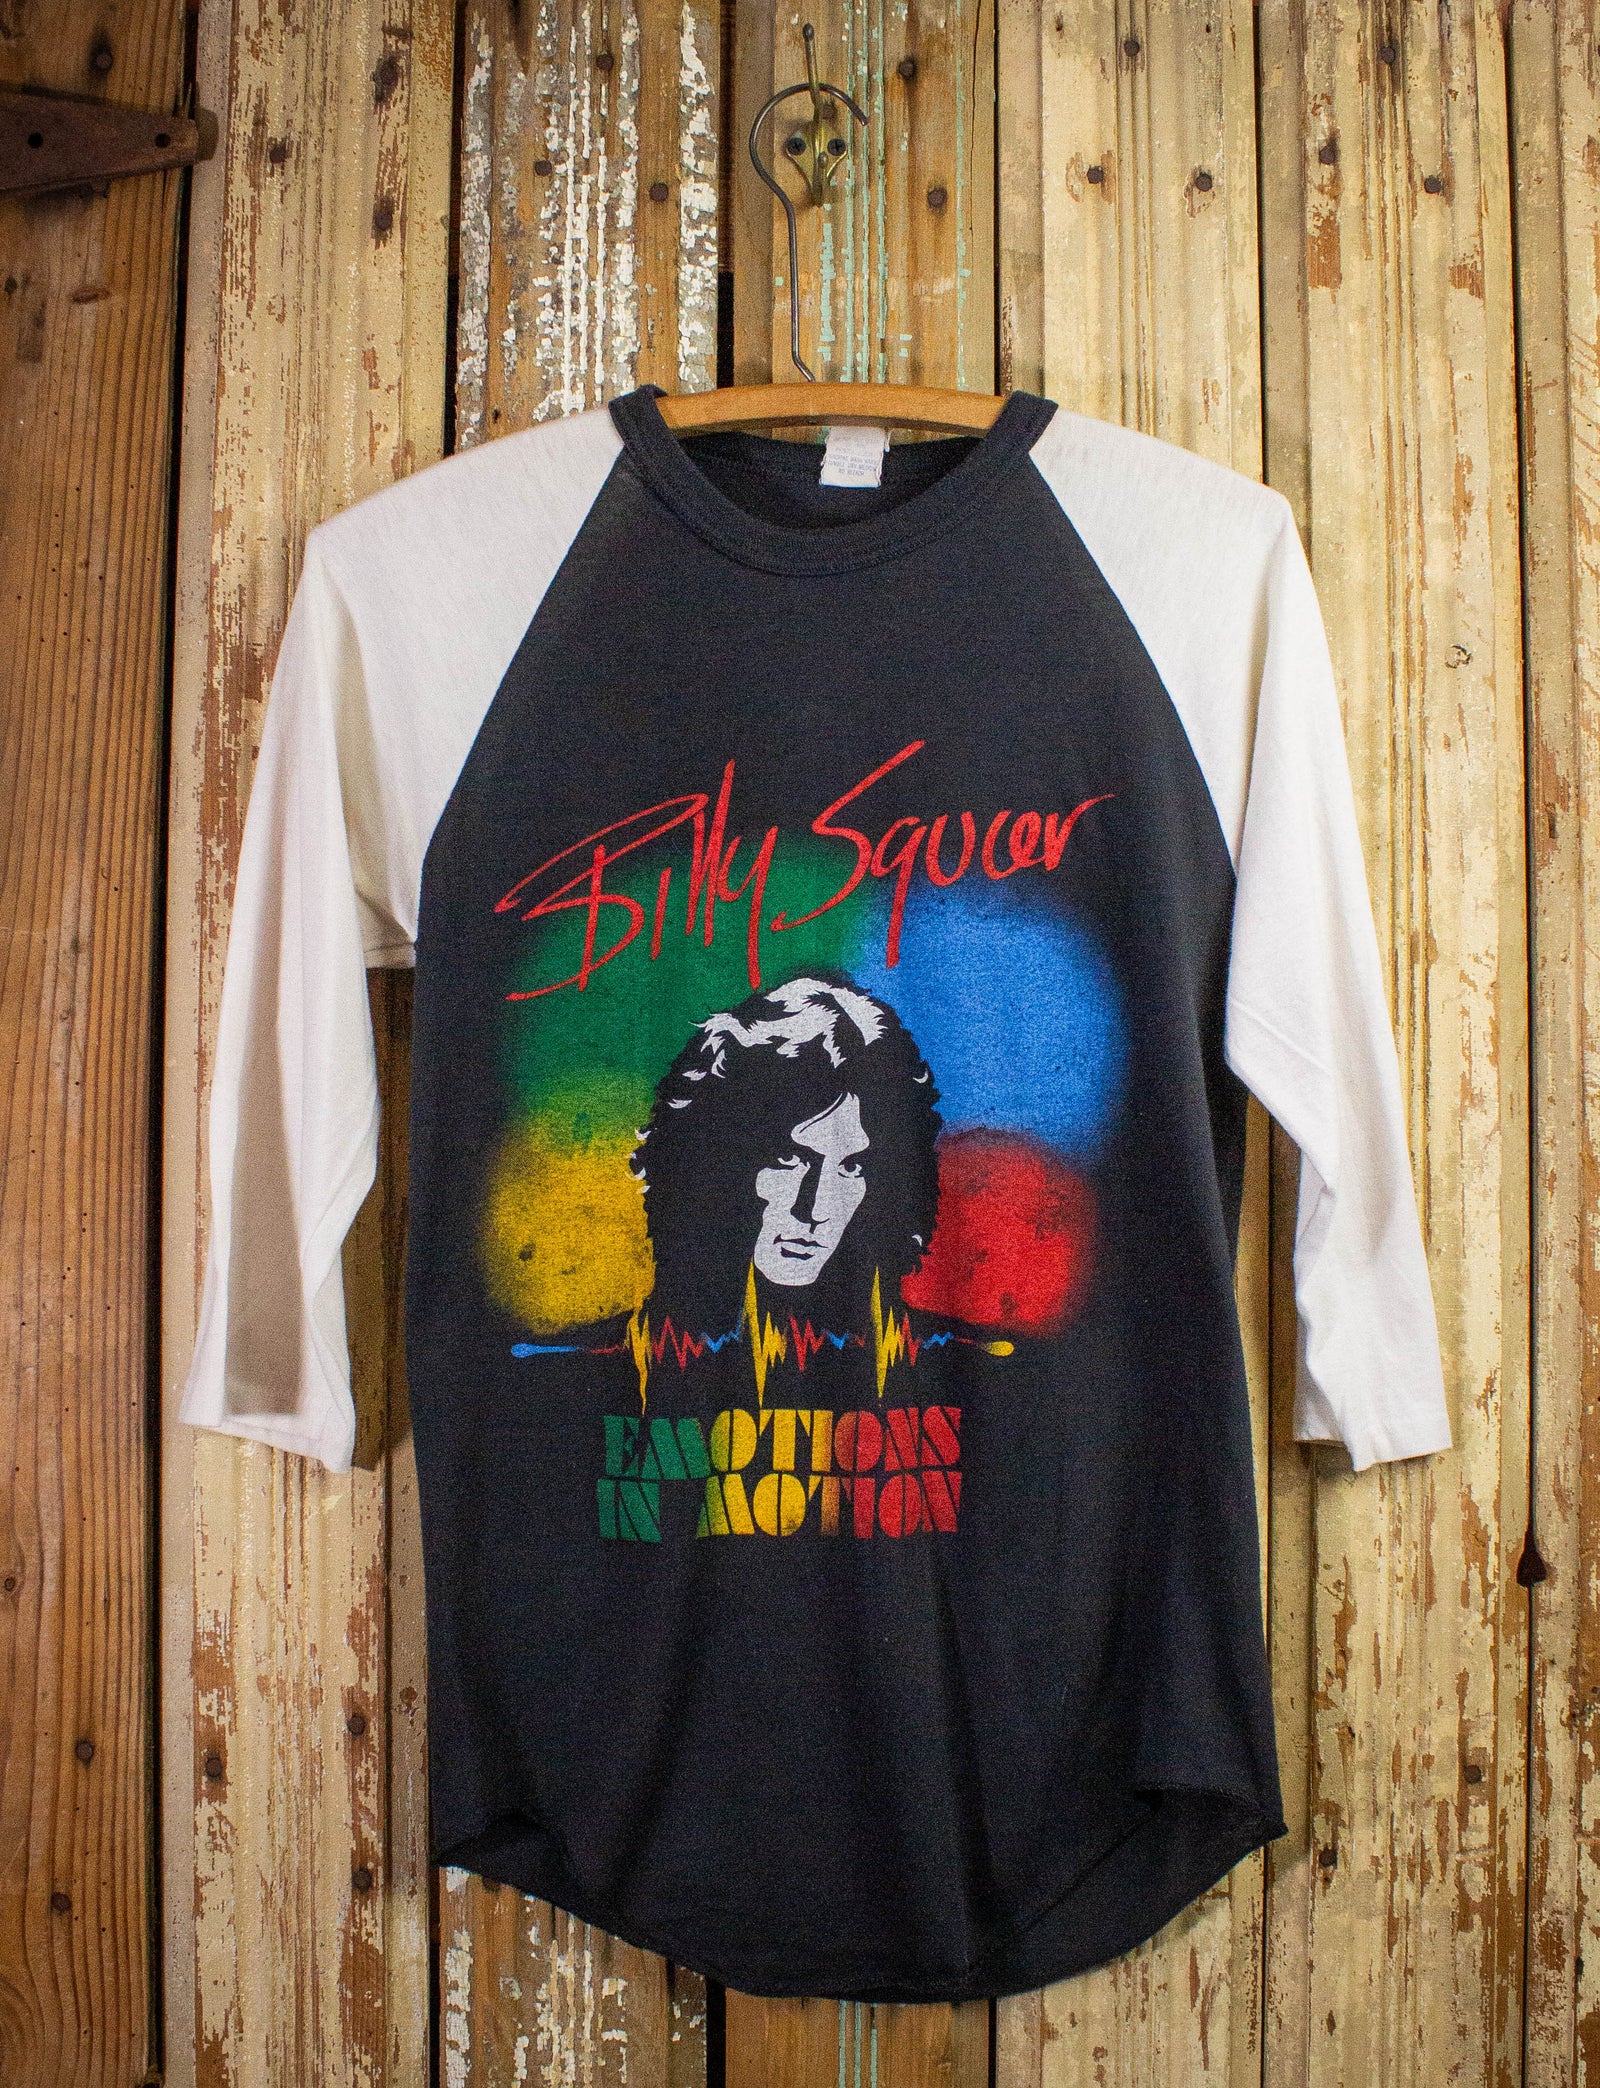 Vintage Billy Squier Emotions in Motion Raglan Concert T Shirt 1982 Black/White Small